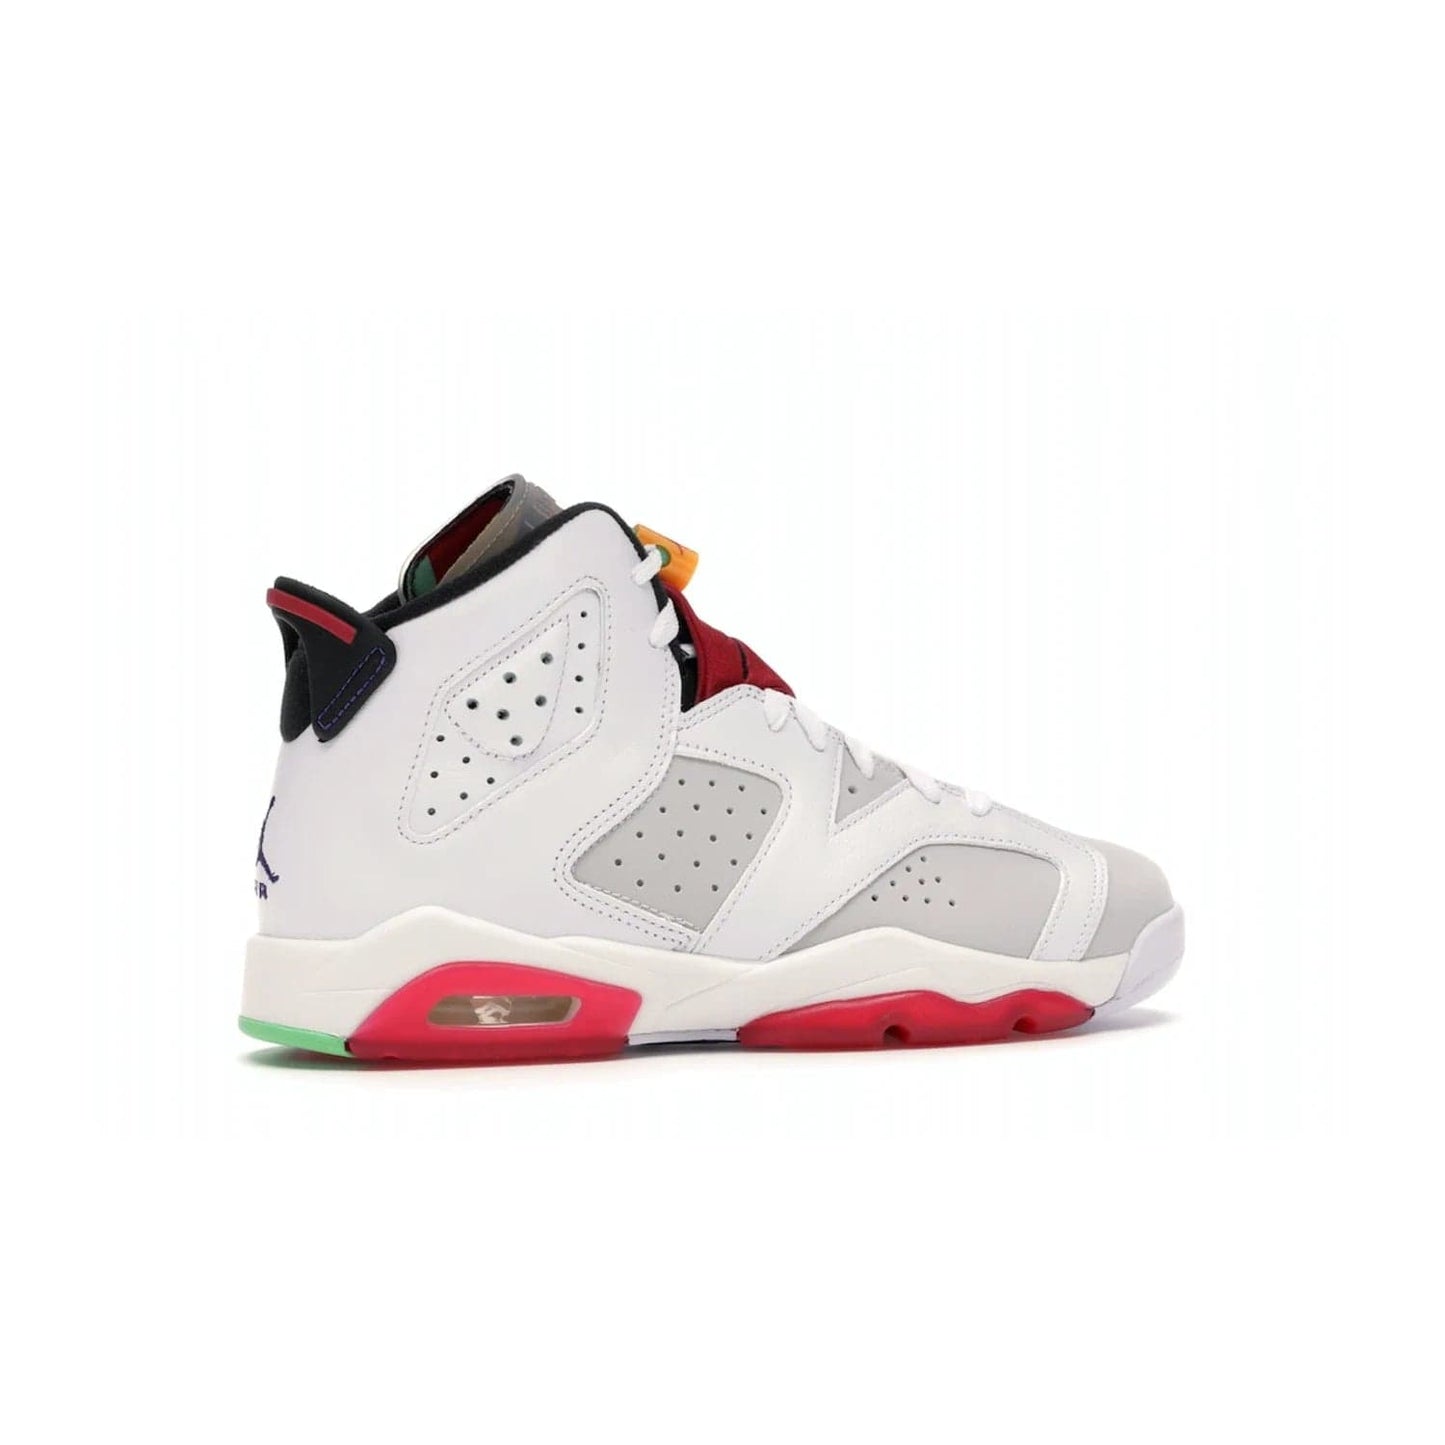 Jordan 6 Retro Hare (GS) - Image 35 - Only at www.BallersClubKickz.com - The Air Jordan 6 Hare GS. Comfortable suede upper, perforations, red pods, two-tone midsole, and signature "Jumpman" emblem. Released 17 June 2020. Perfect for any sneakerhead.